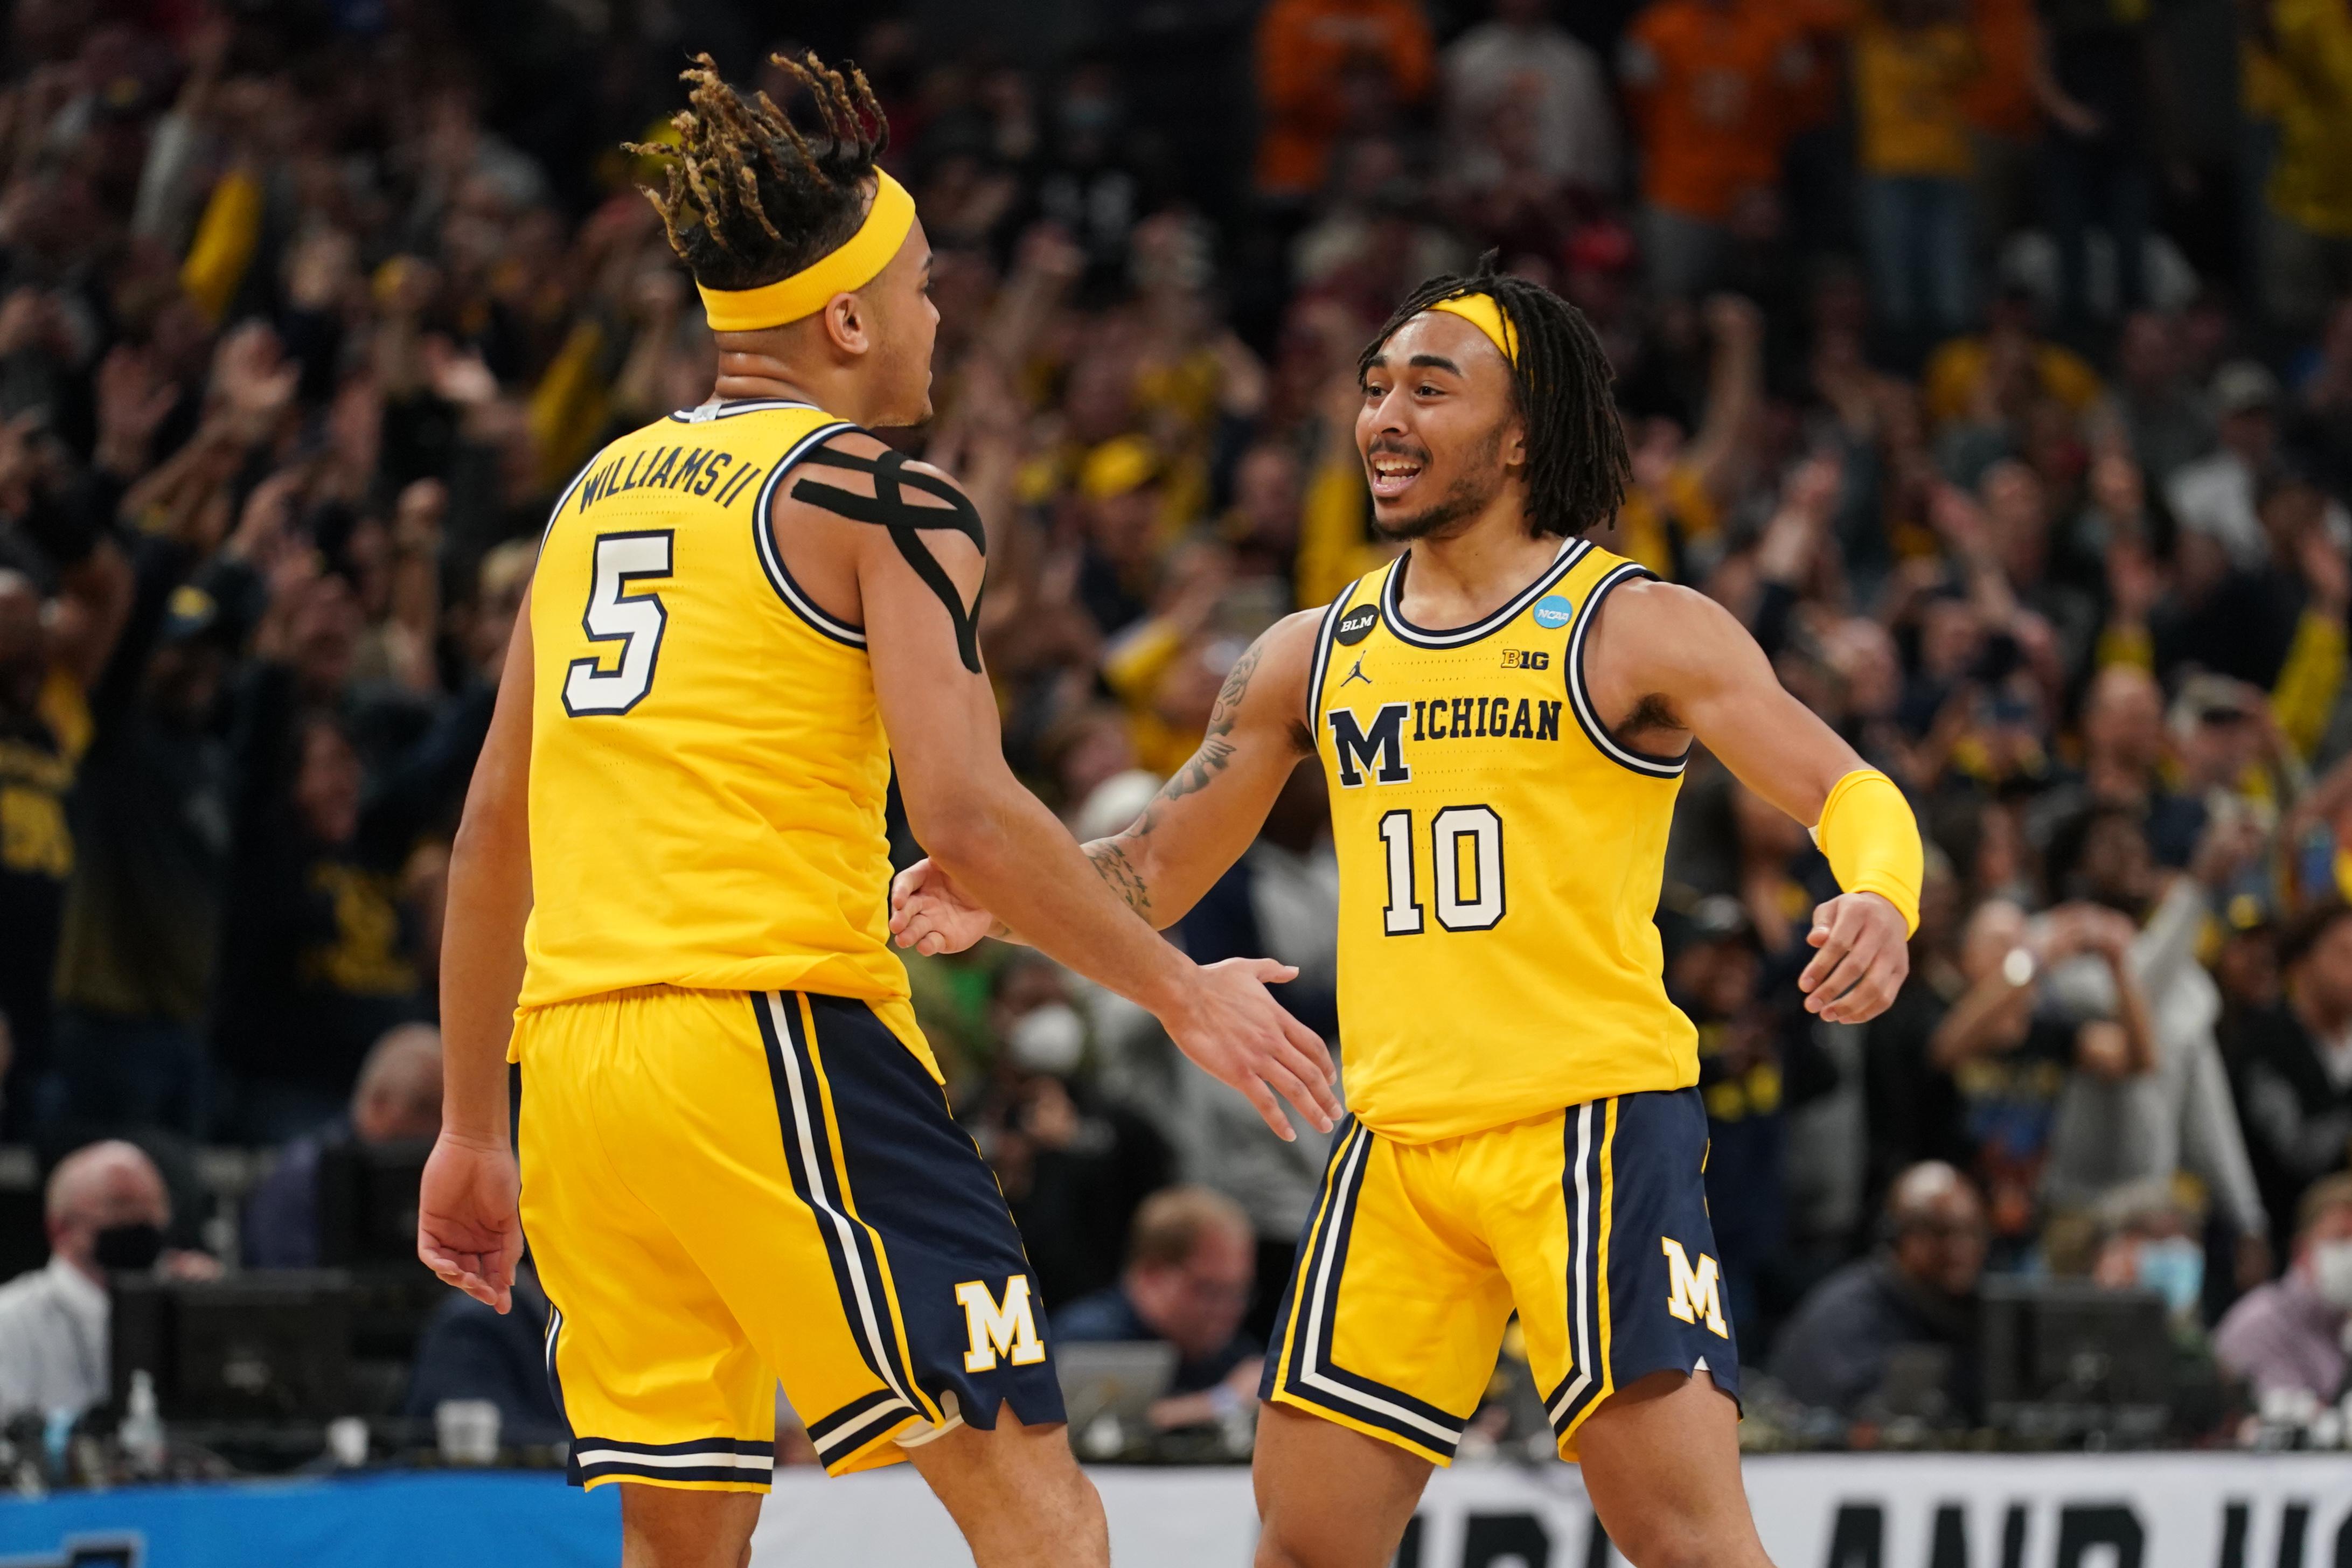 Michigan NCAA Tournament History: National Championships, All-Time Record, Best March Madness Results & More